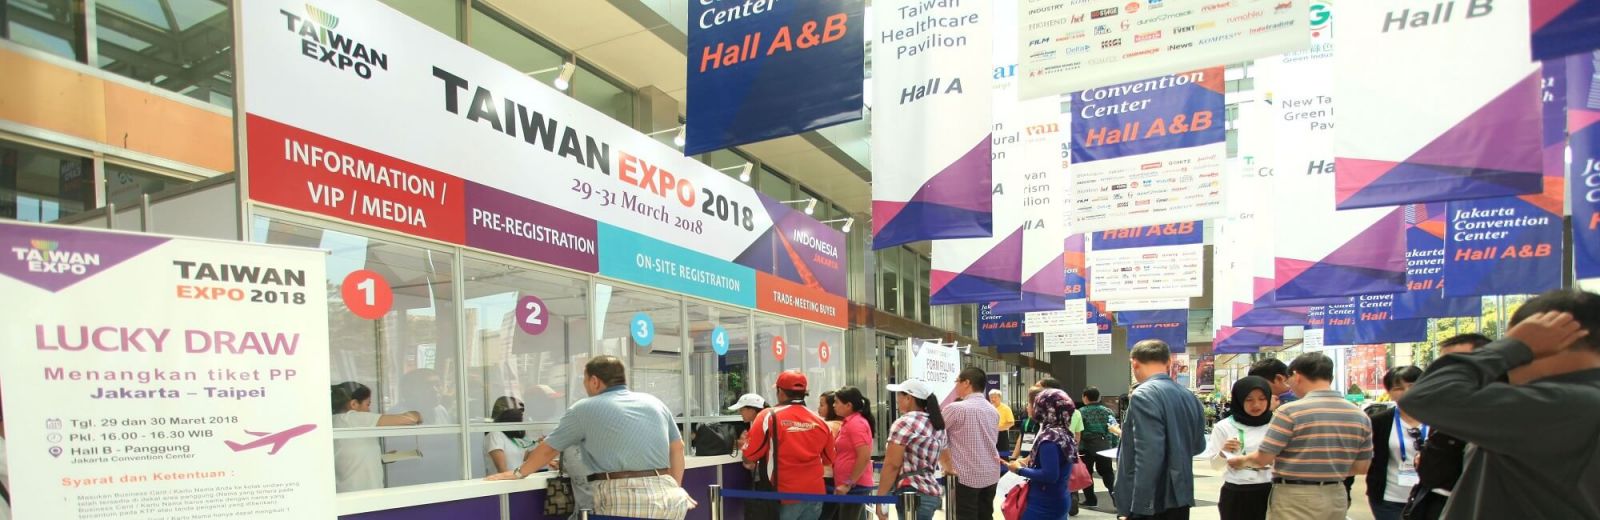 OSIC at TAIWAN EXPO INDONESIA 2019